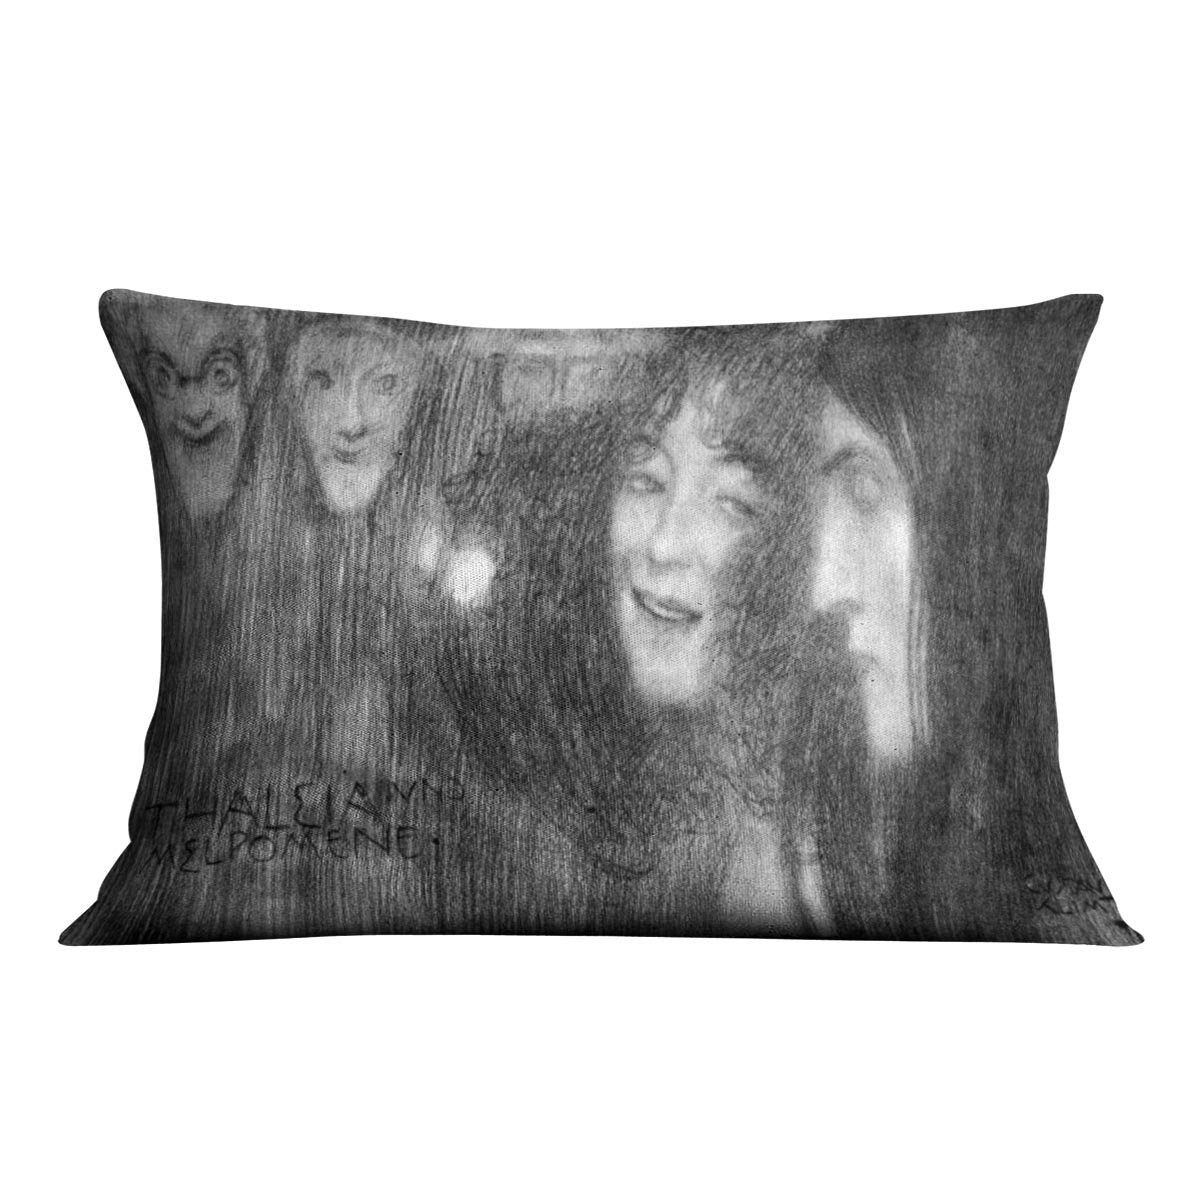 Two girls heads in profile and masks Thalia and Melpomene by Klimt Throw Pillow